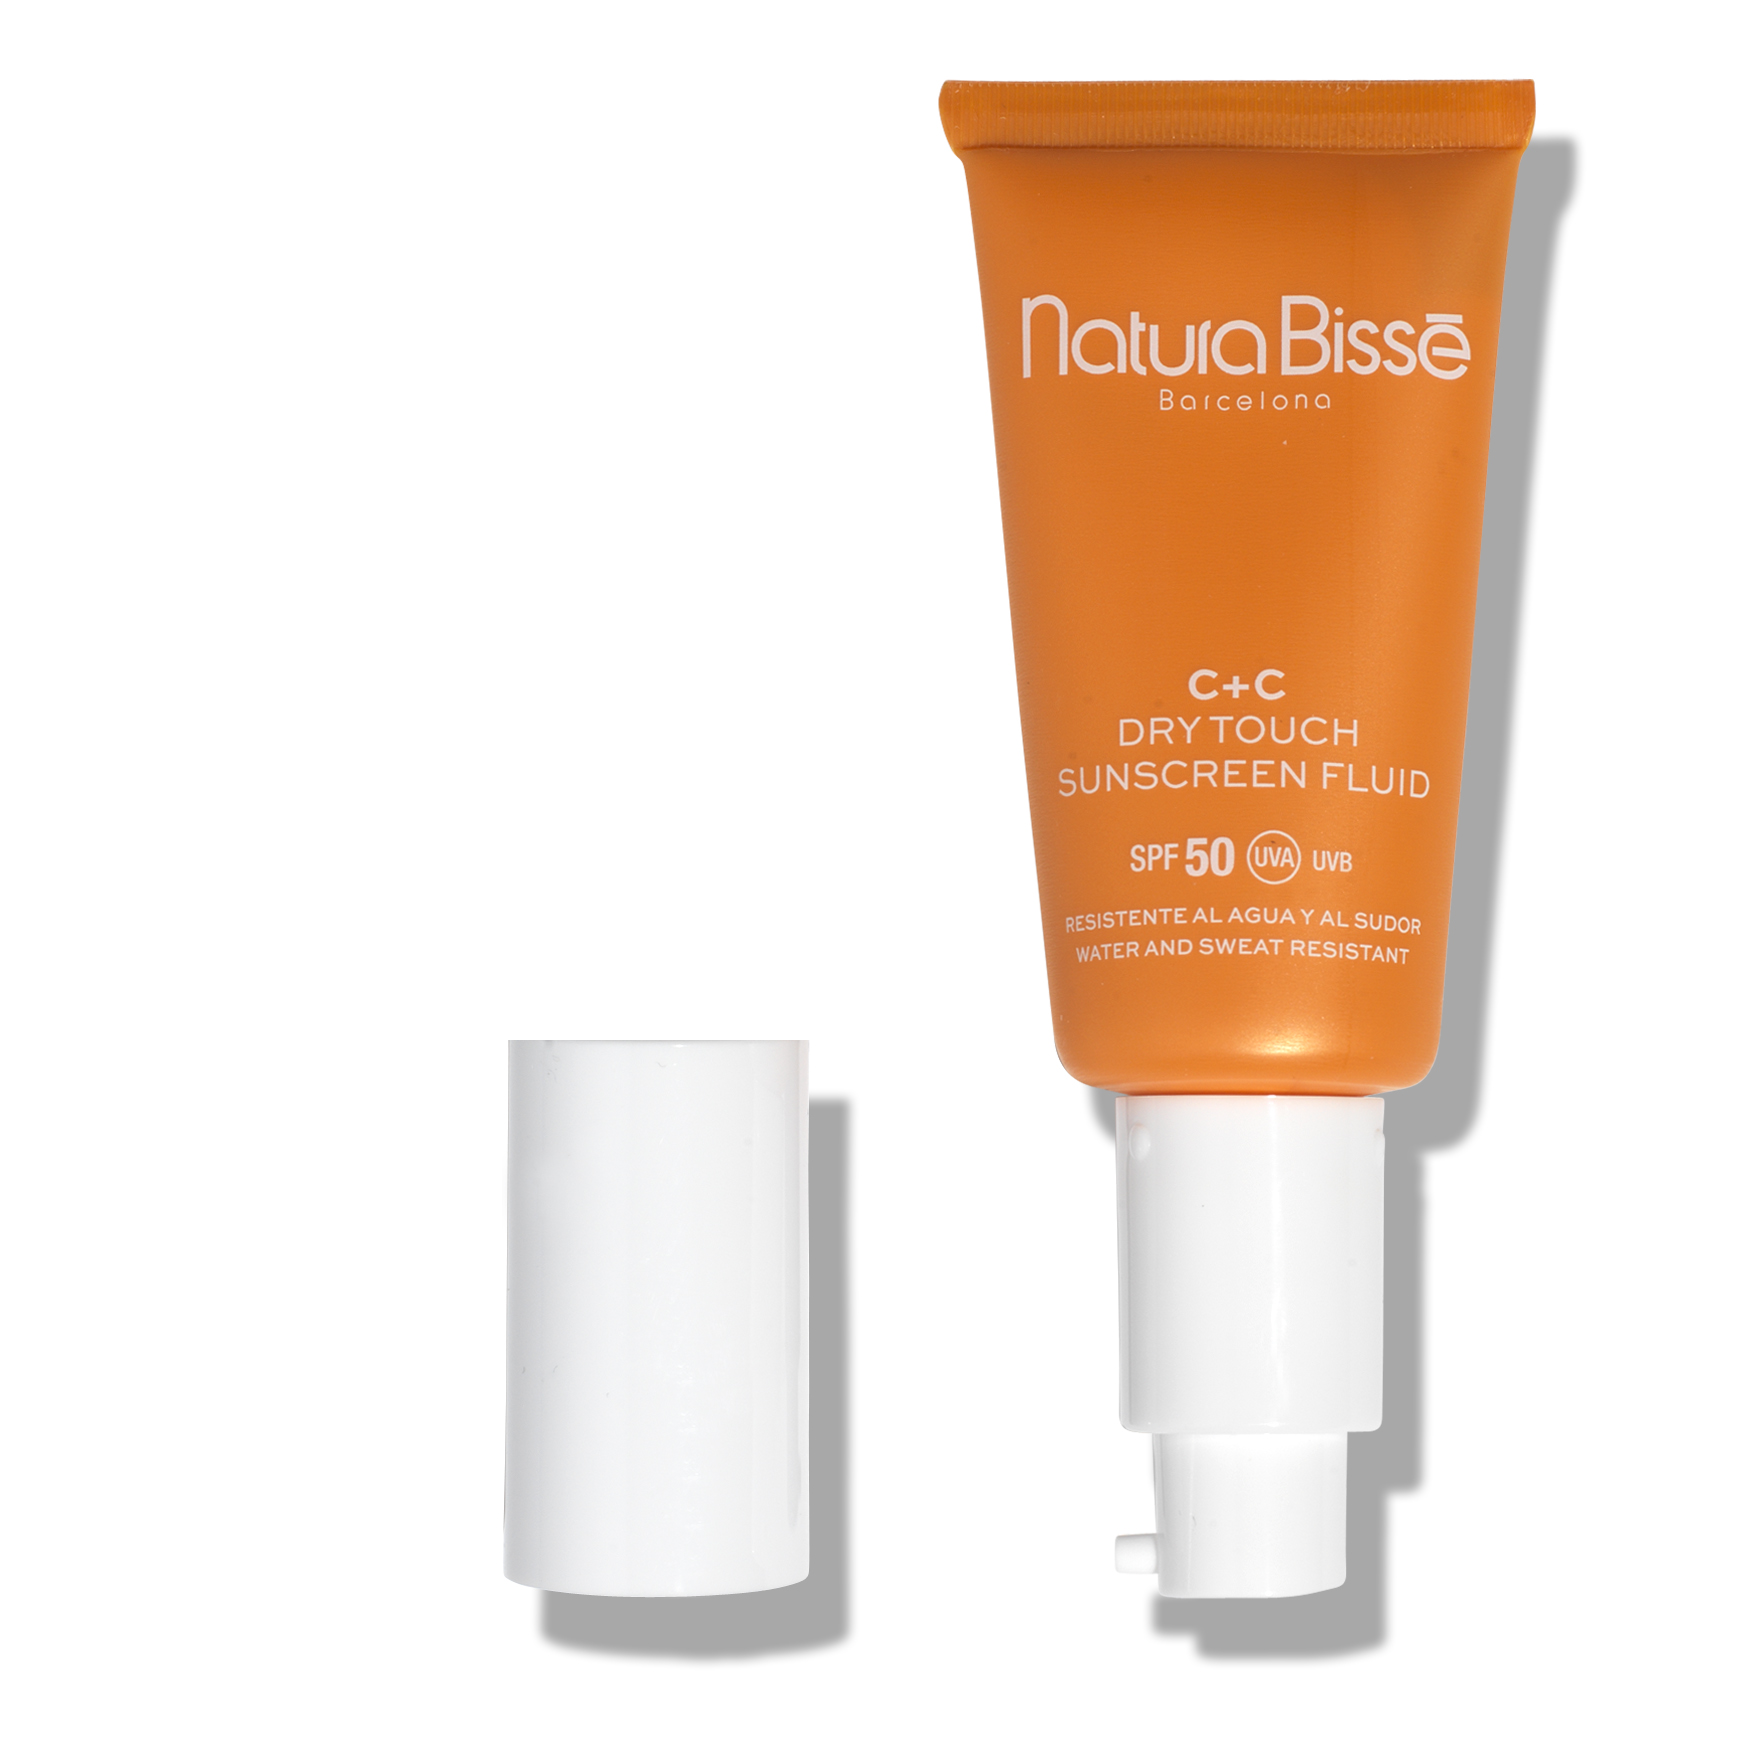 Natura Bissé C+C Dry Touch Sunscreen Fluid SPF 50 | Space NK